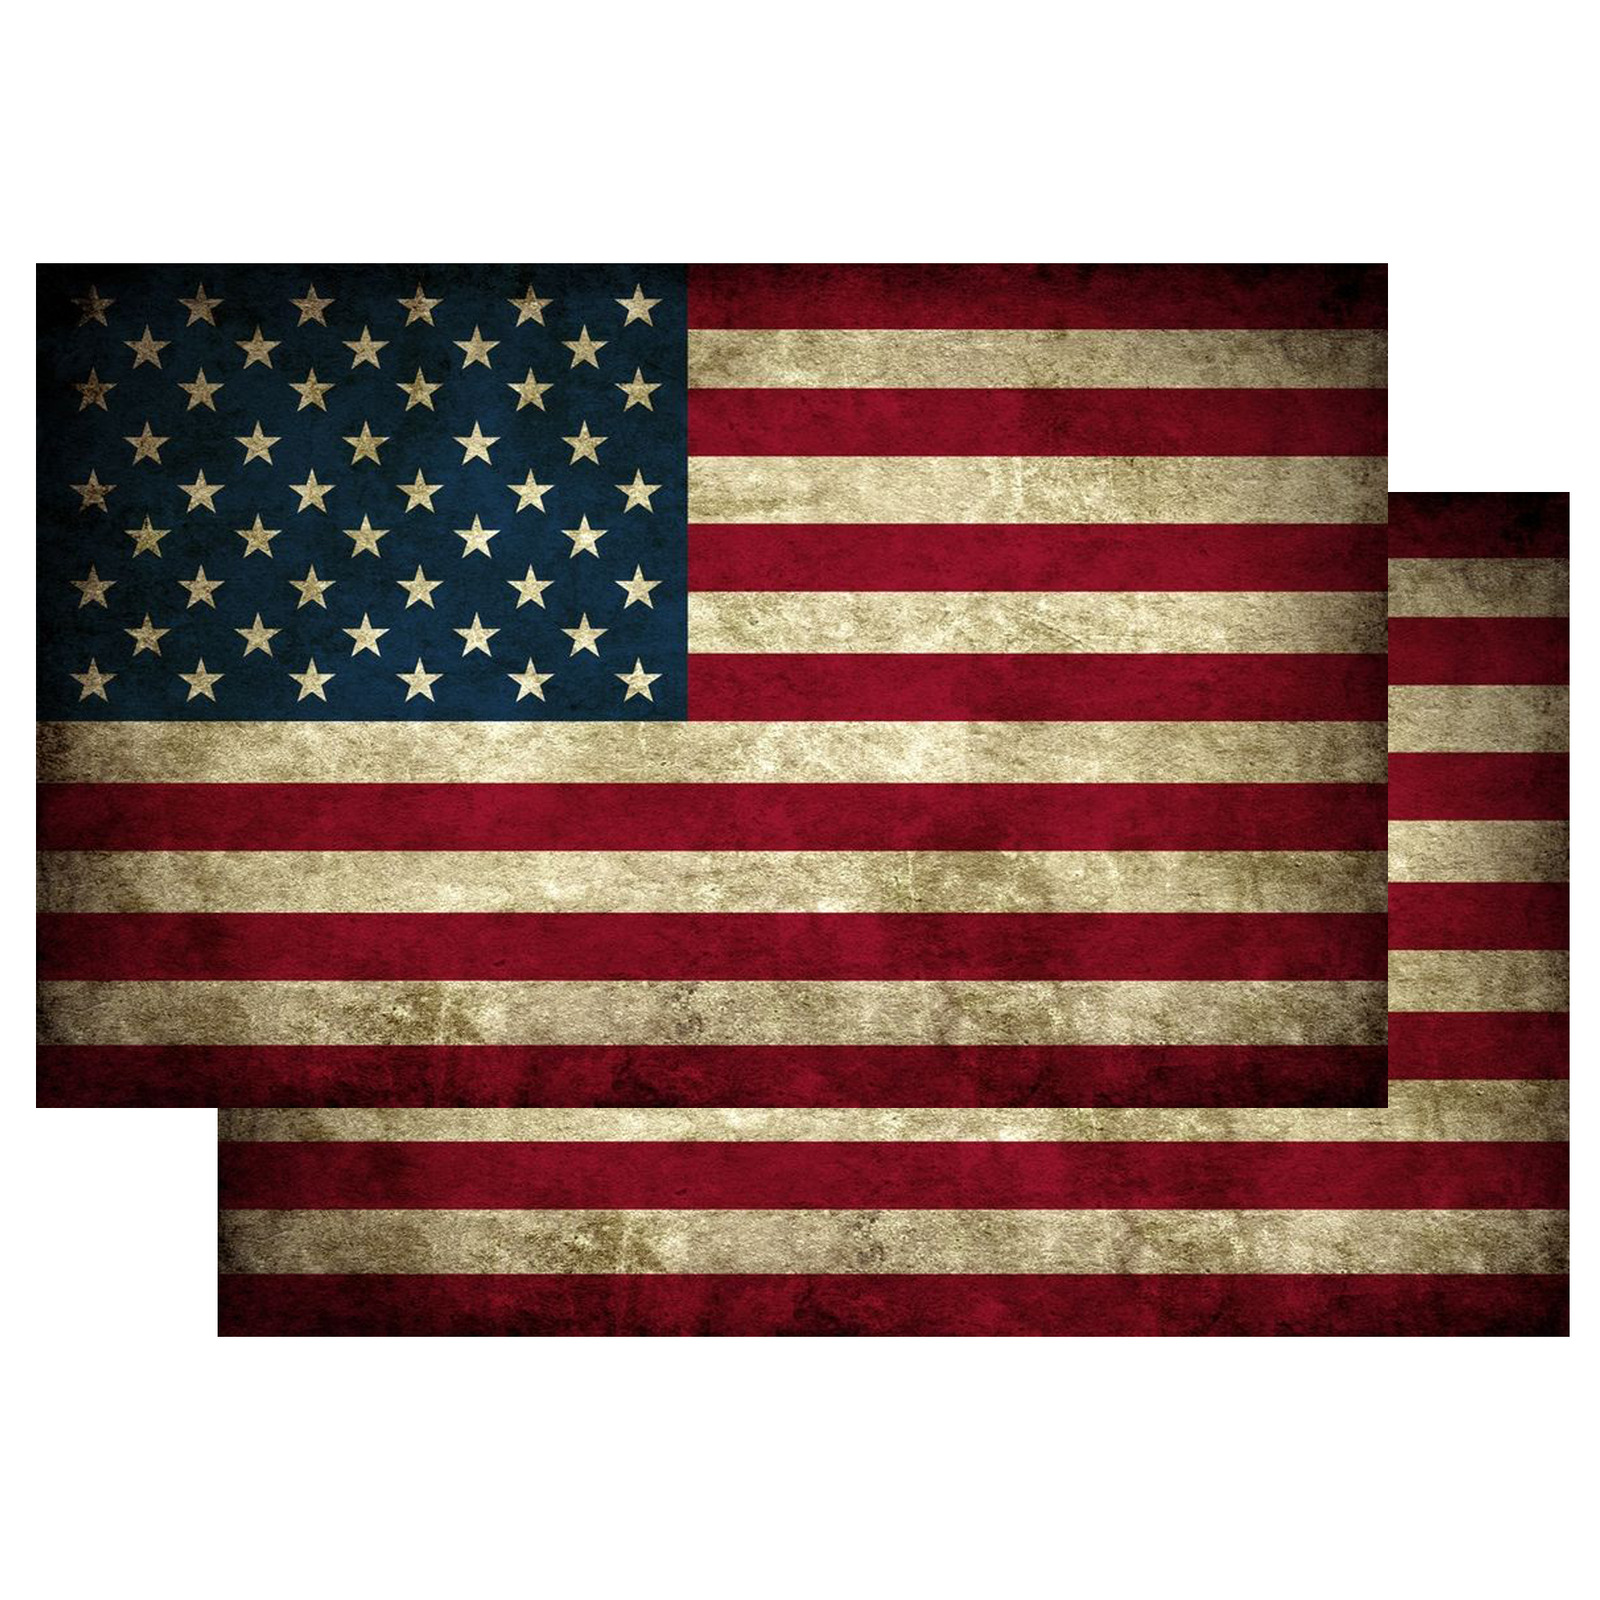 2x Aged Rustic United States American US Flag Grunge Stickers 5x3 Inch Decal 